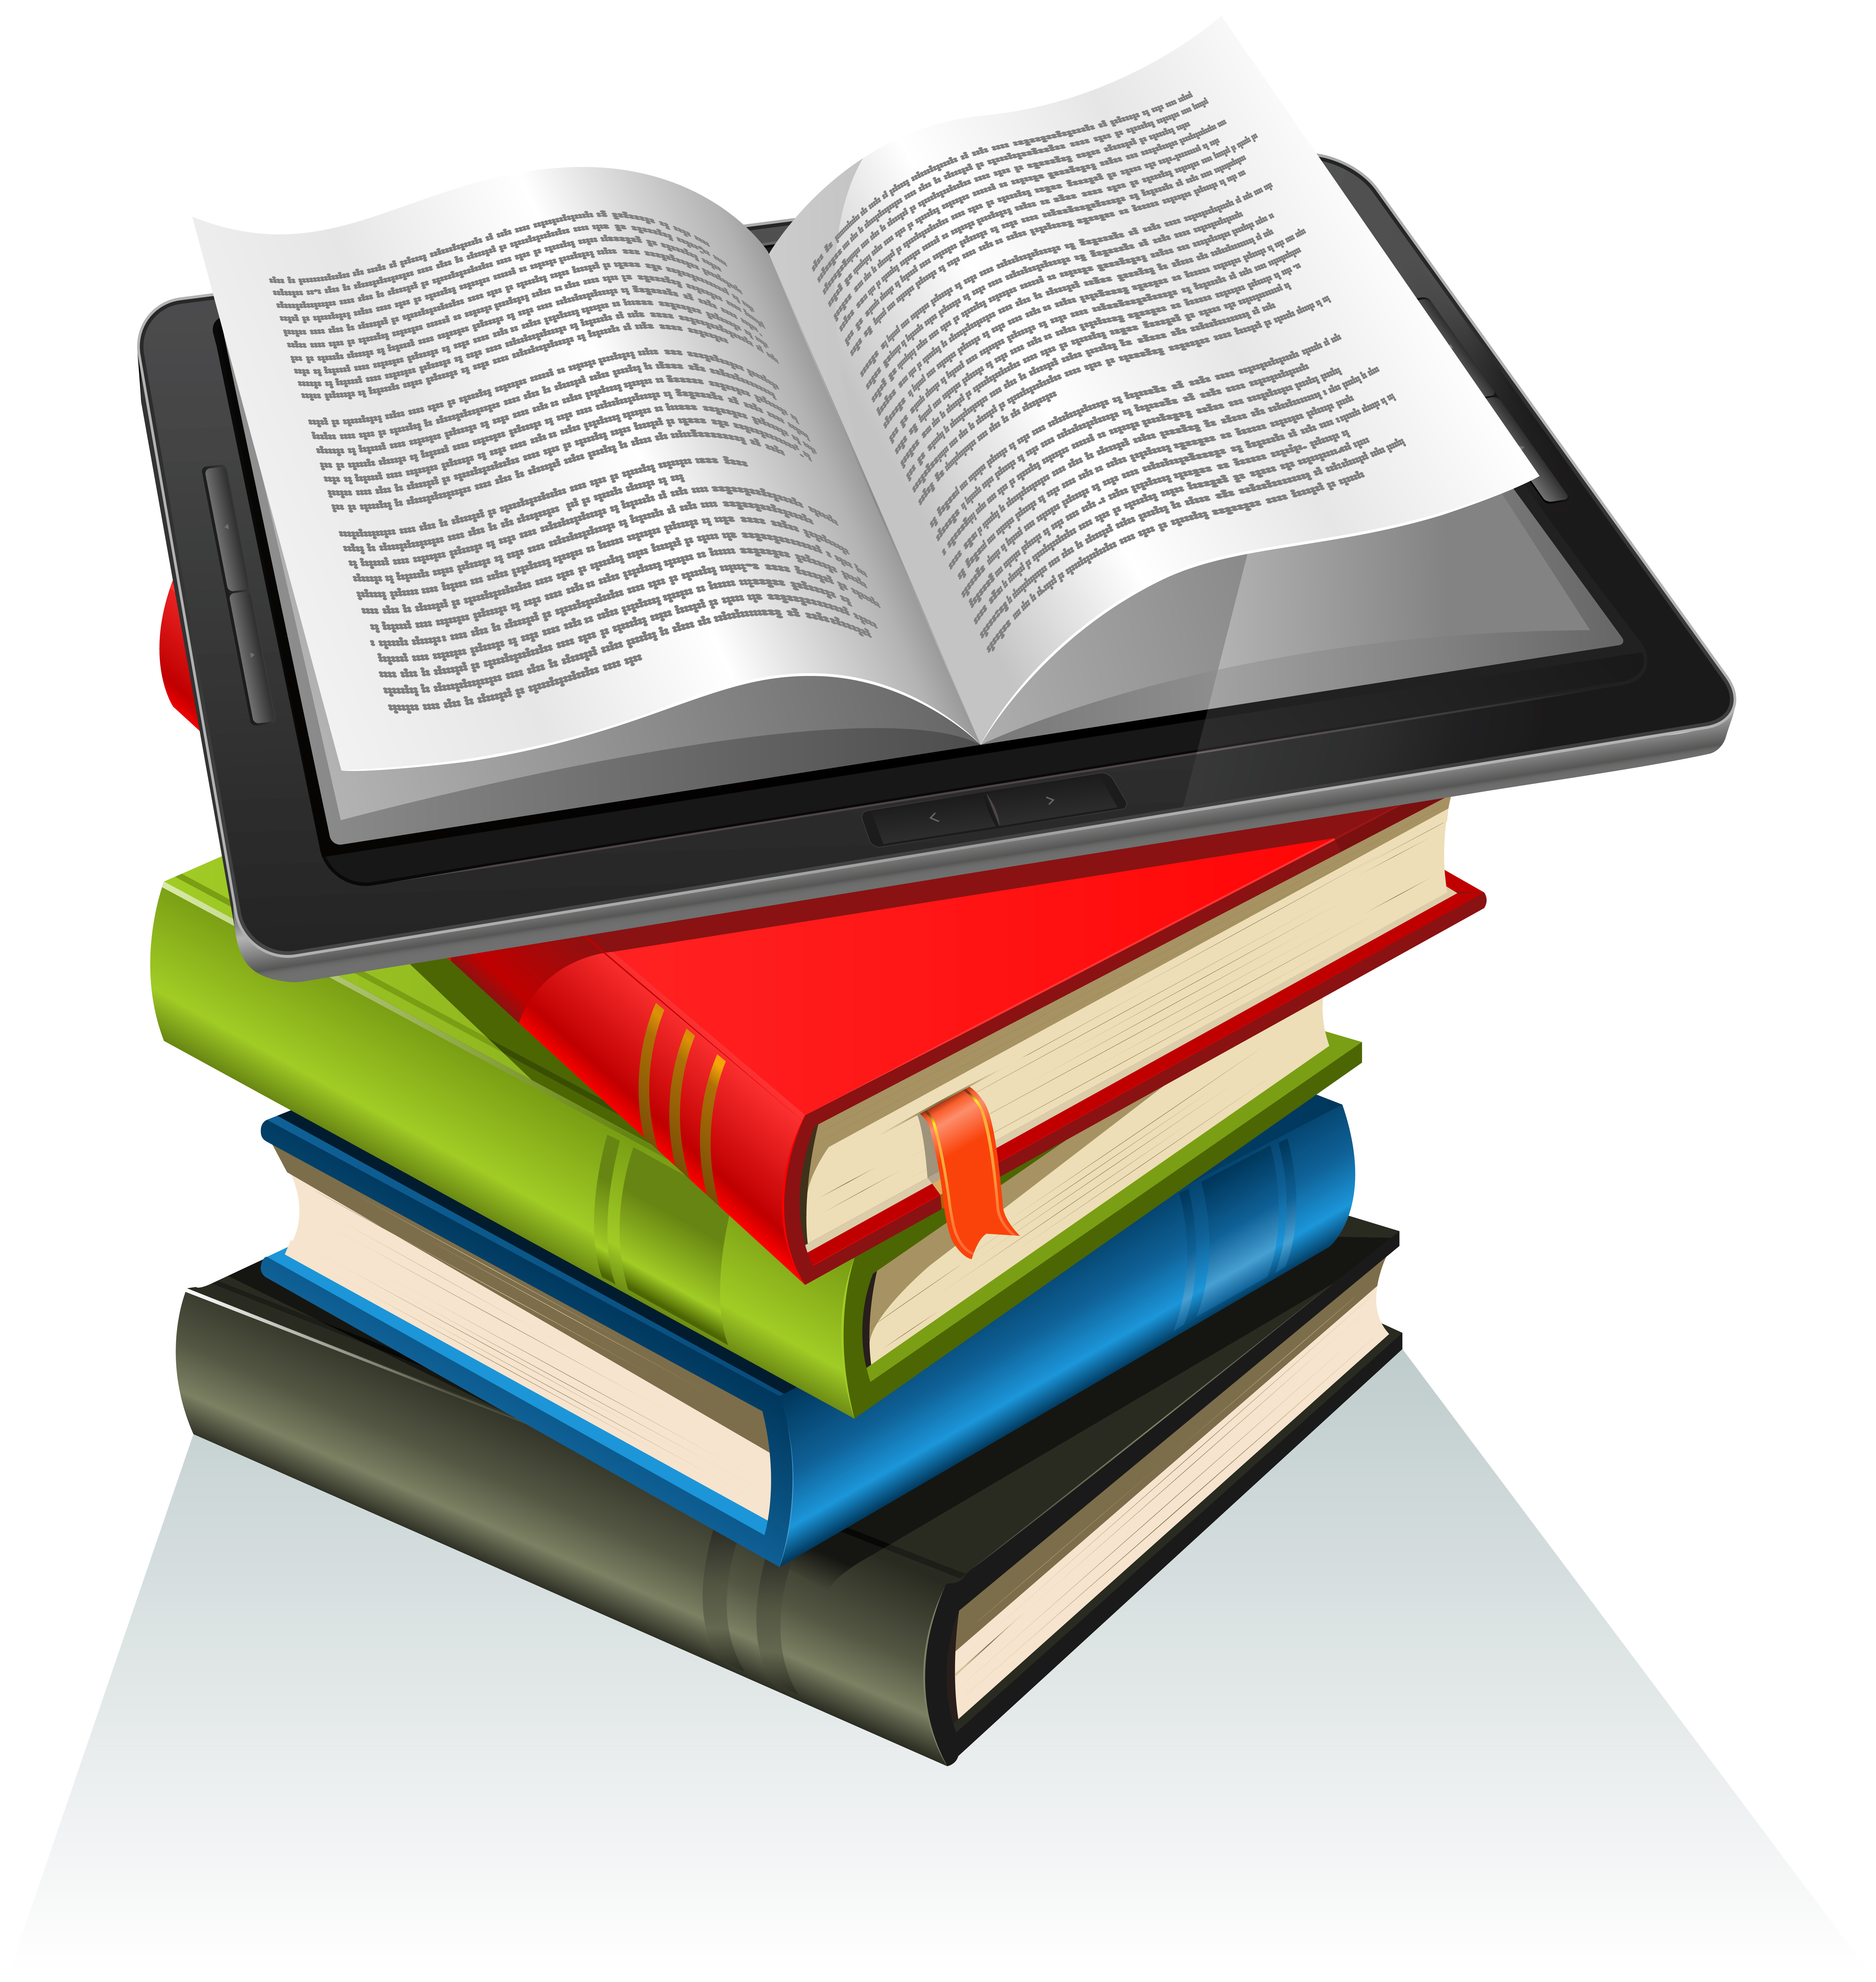  Book  Stack  And Tablet PC Download Free Vectors  Clipart 